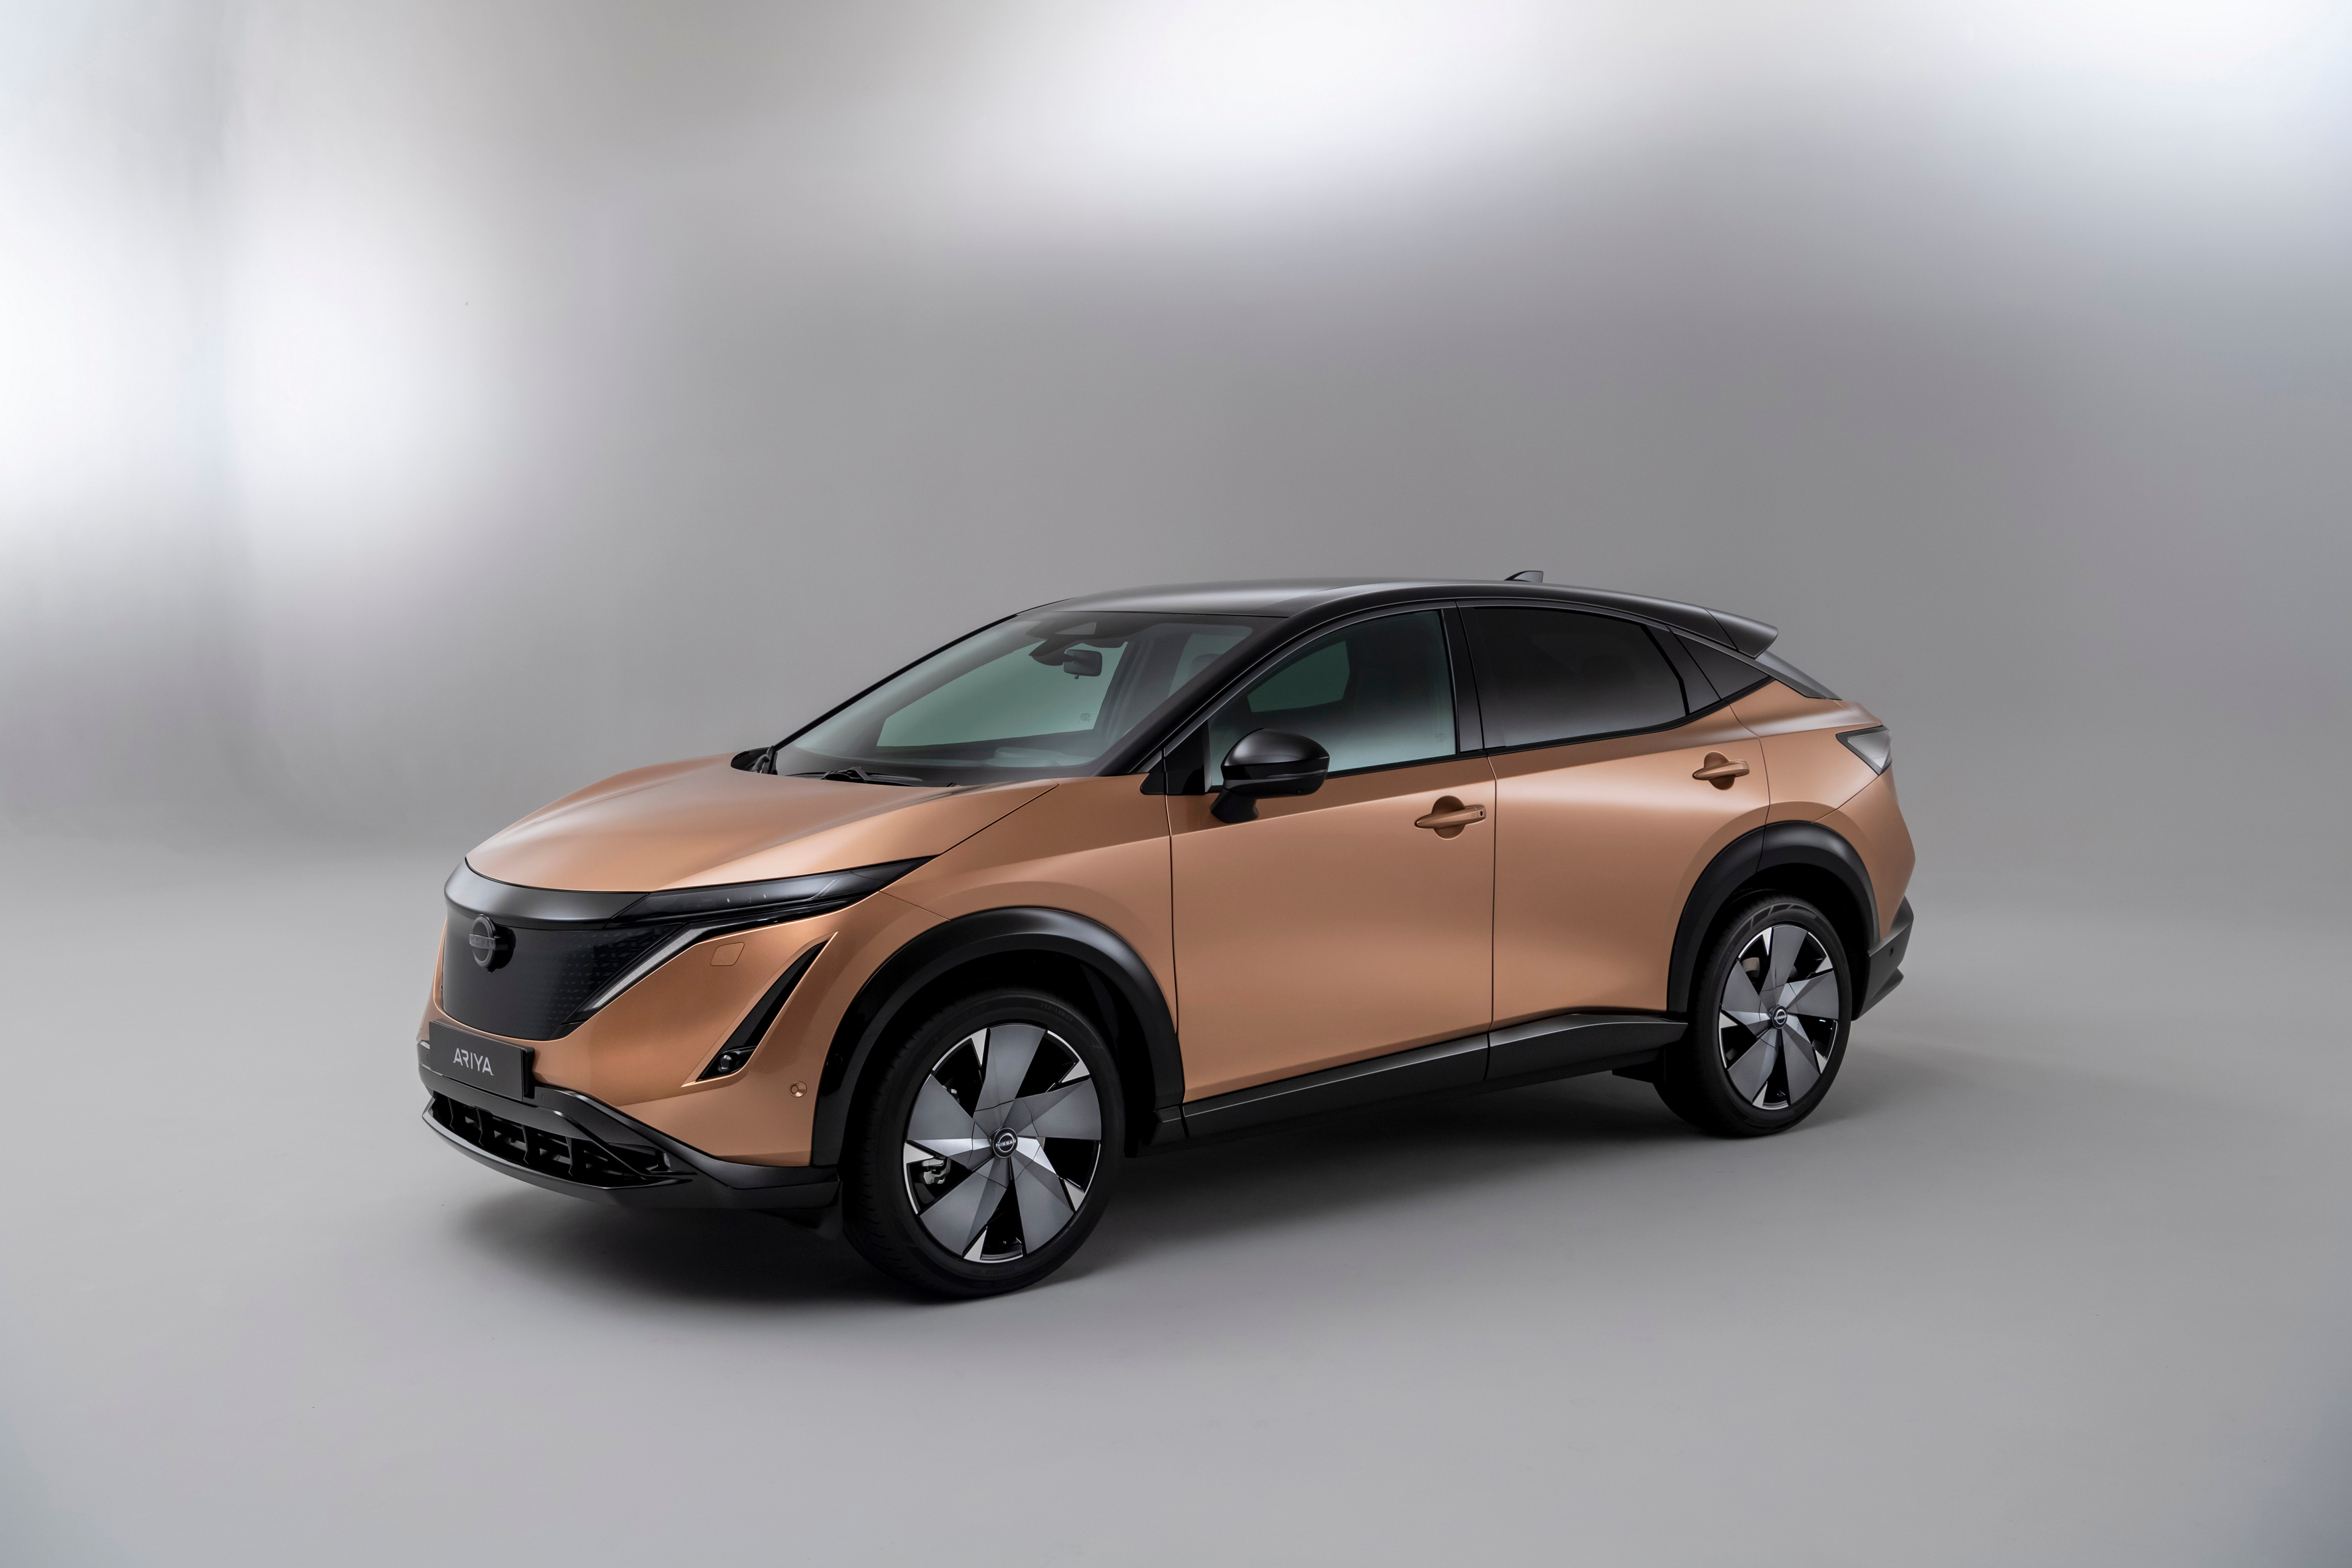 Wallpapers automobile Nissan crossover on the desktop